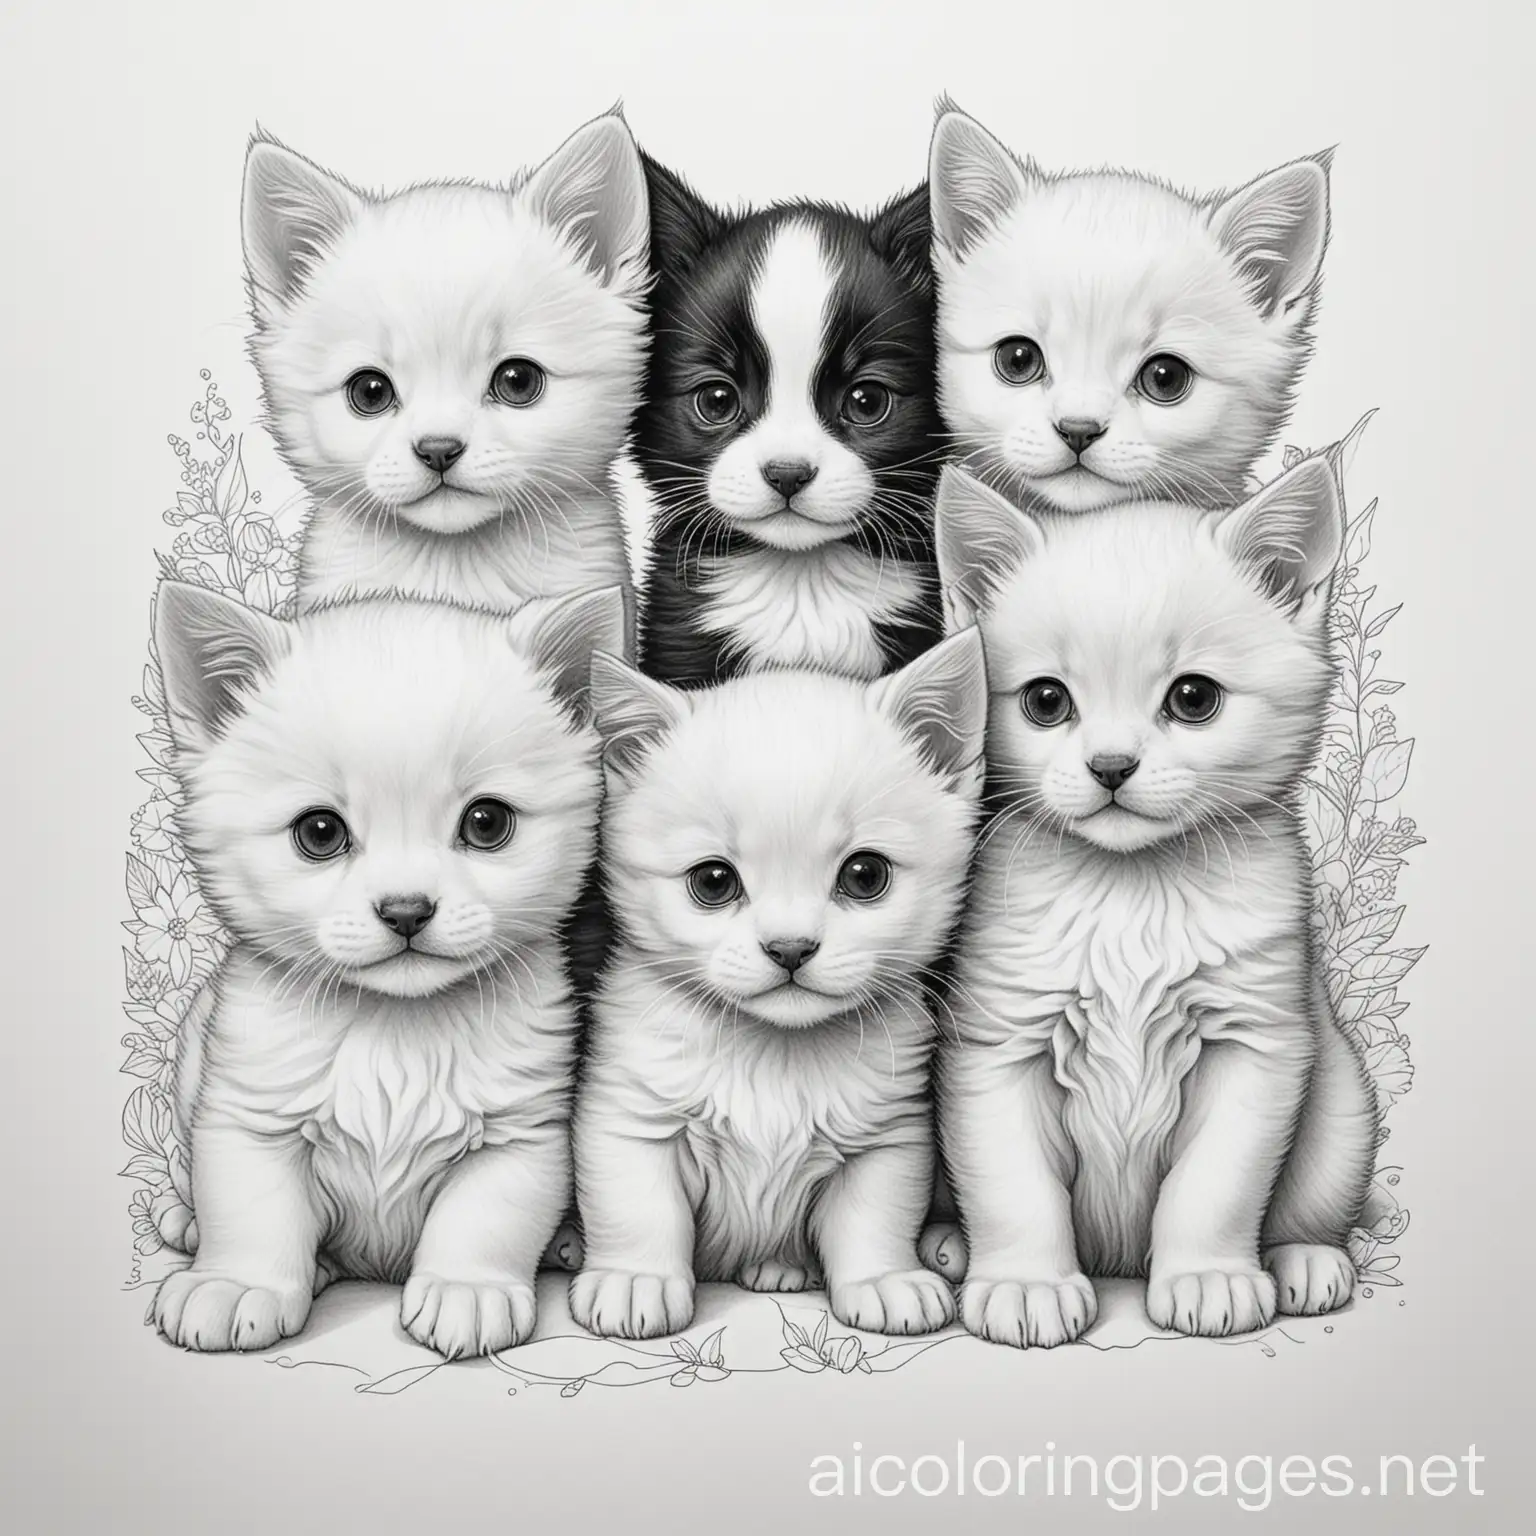 coloring of puppies and kittens, Coloring Page, black and white, line art, white background, Simplicity, Ample White Space